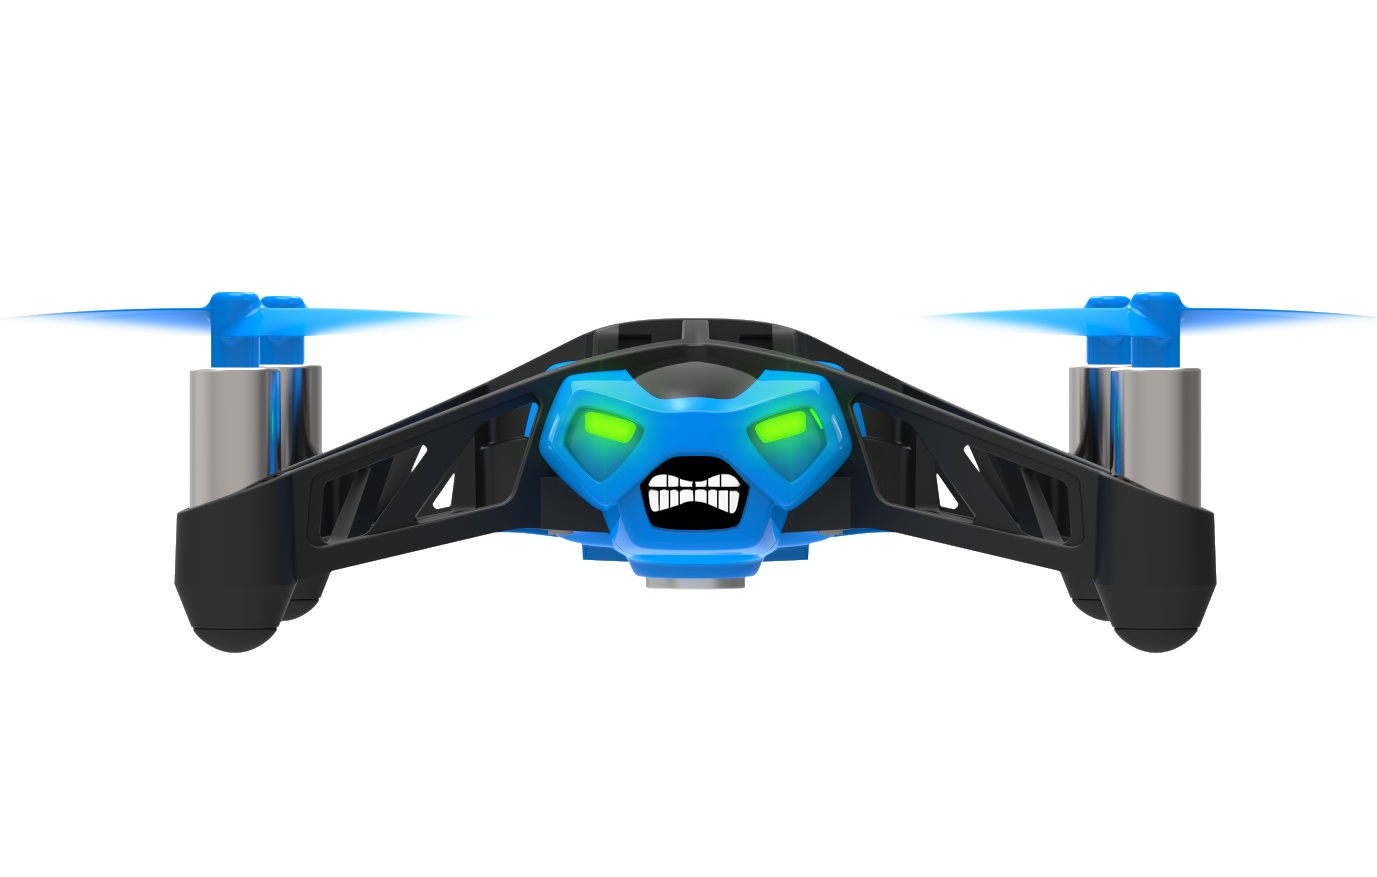 Parrot Mini Drone Rolling Spider Blue